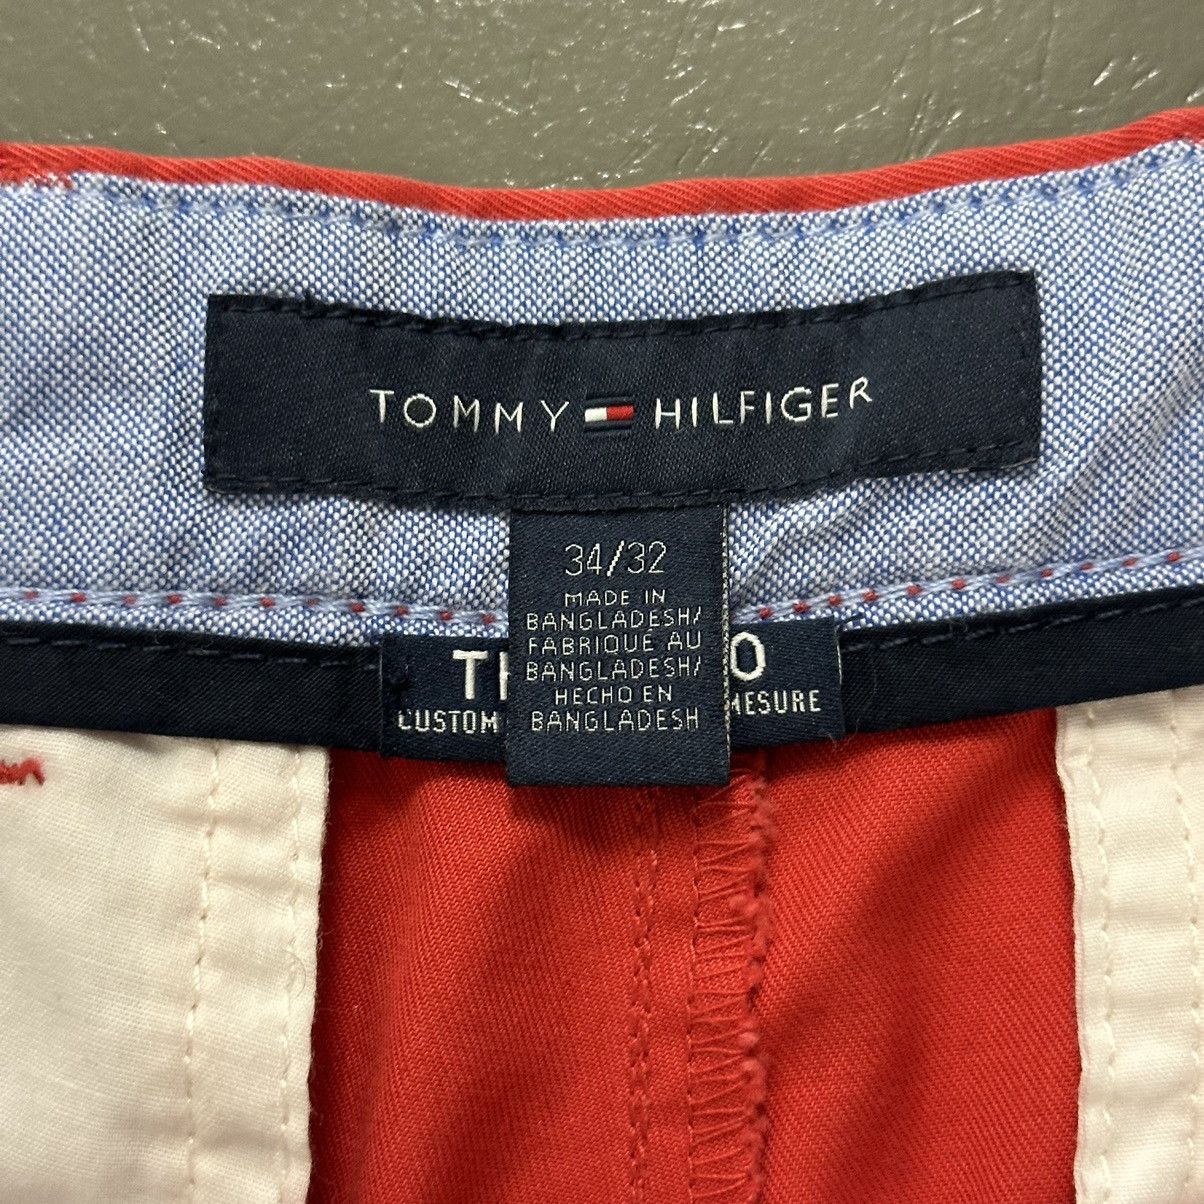 Vintage 2000s Tommy Hilfiger Chino Pants - 7